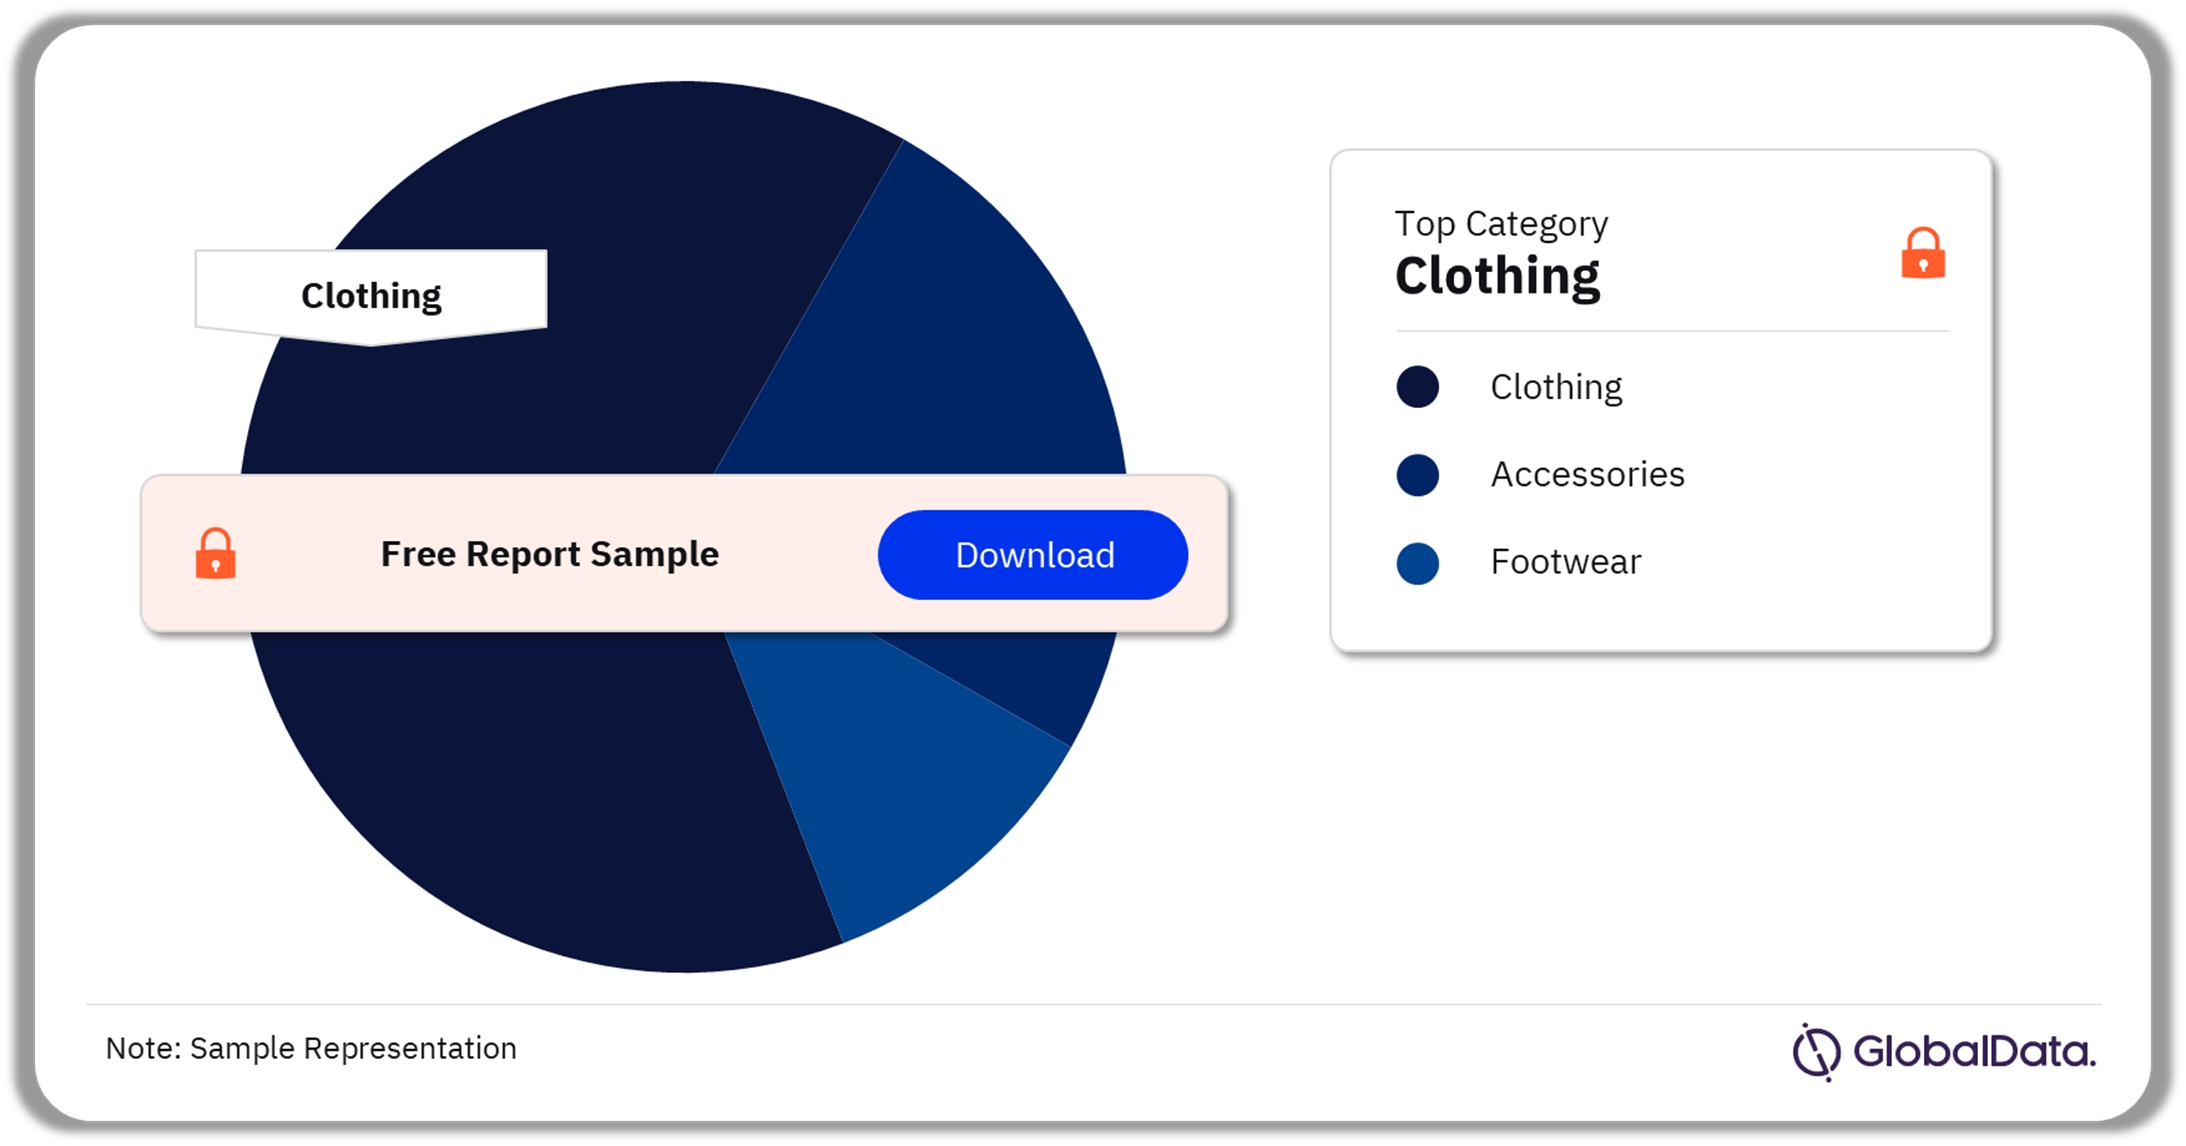 Europe Apparel Market Analysis by Categories, 2022 (%)